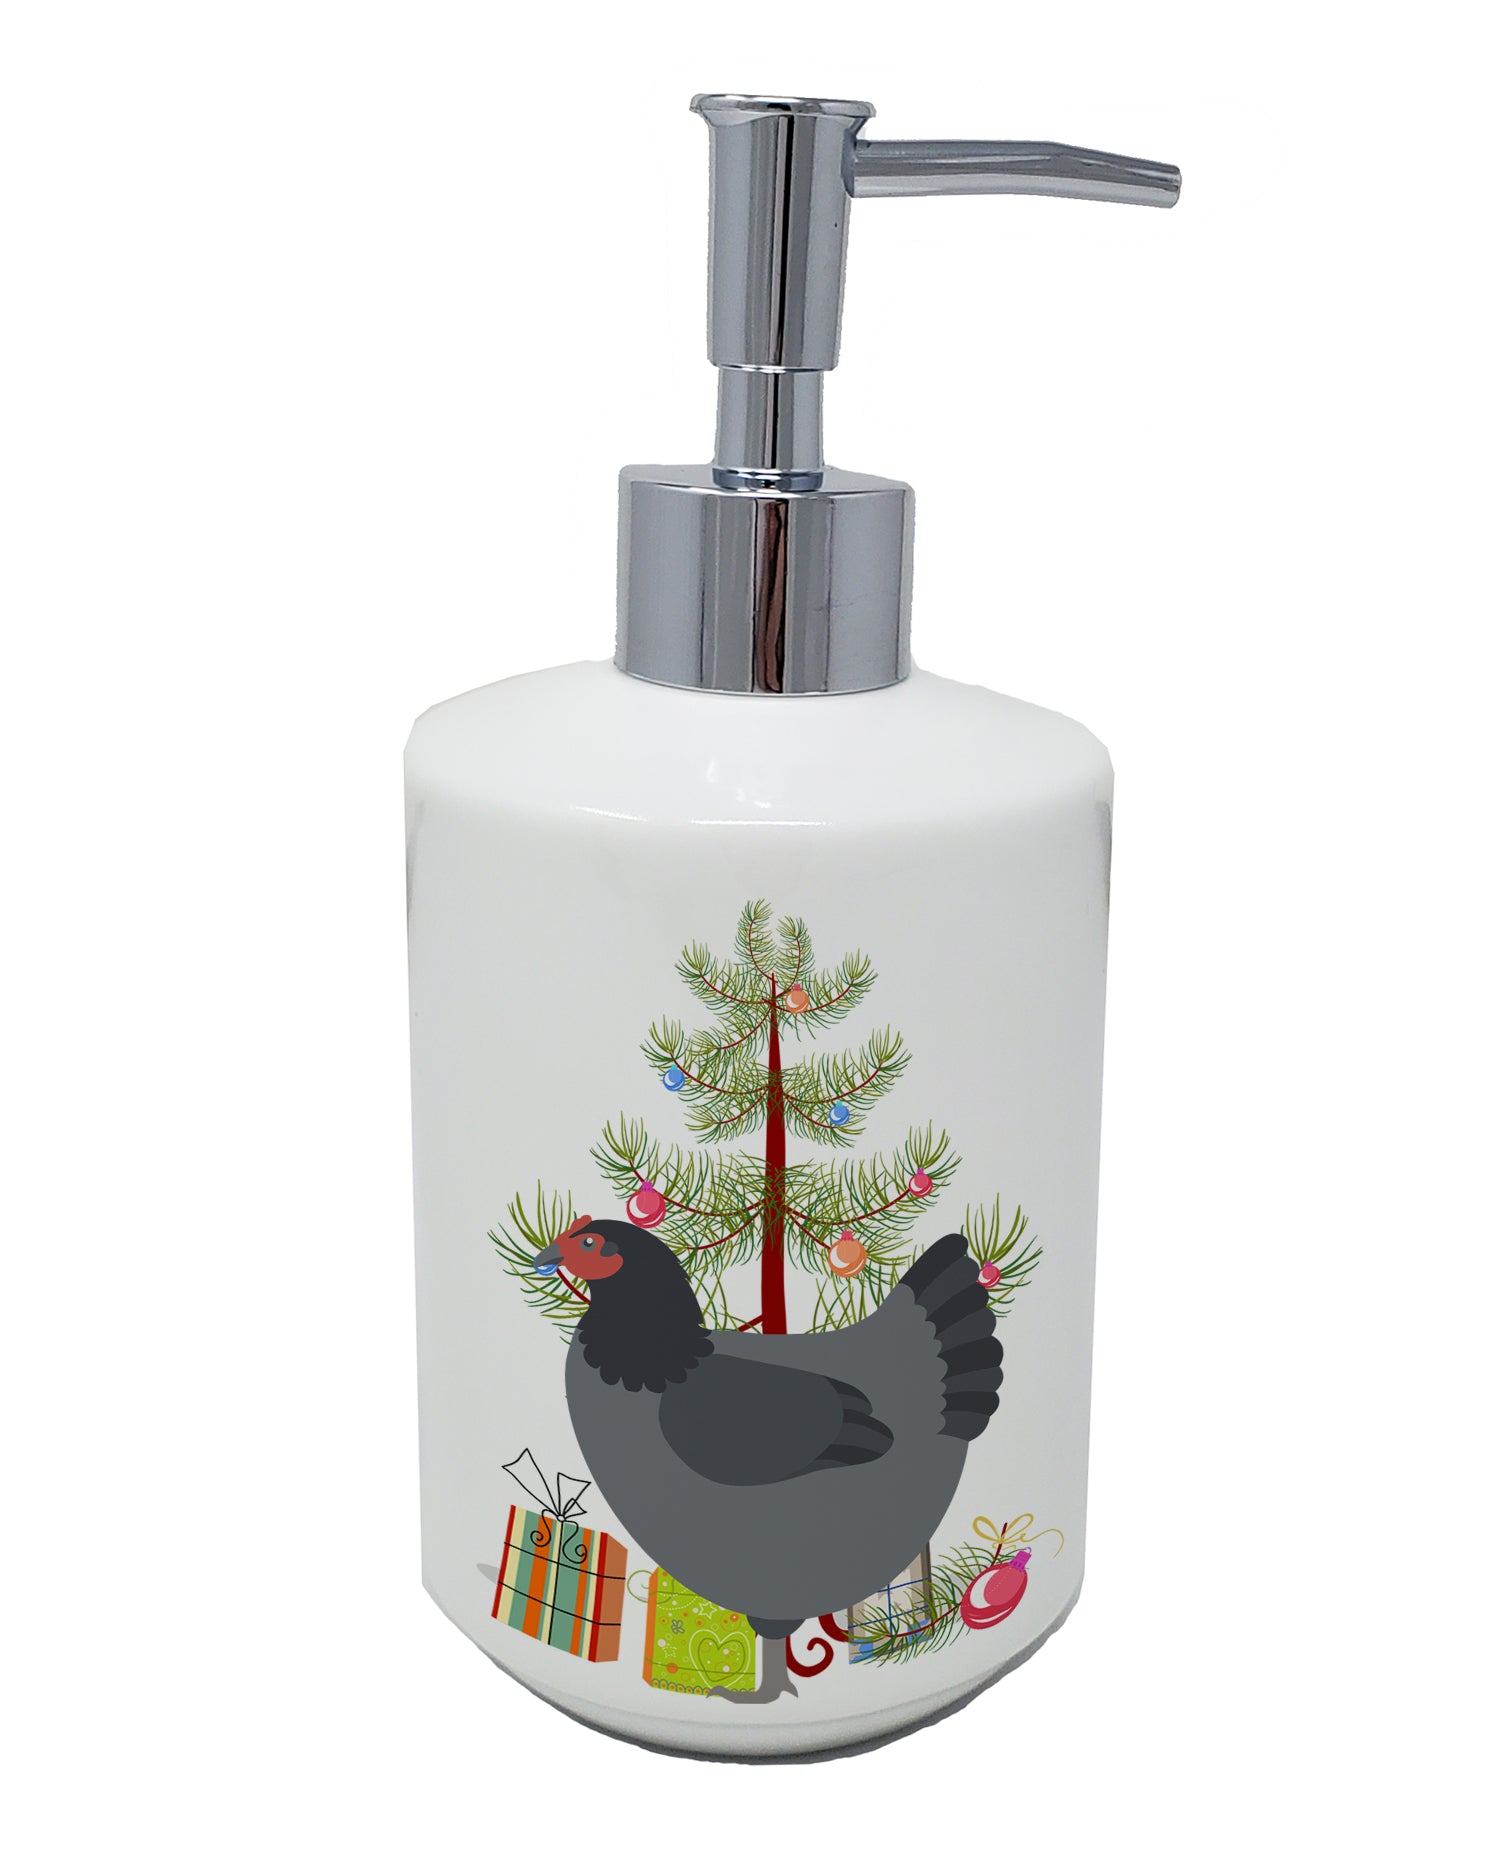 Buy this Jersey Giant Chicken Christmas Ceramic Soap Dispenser